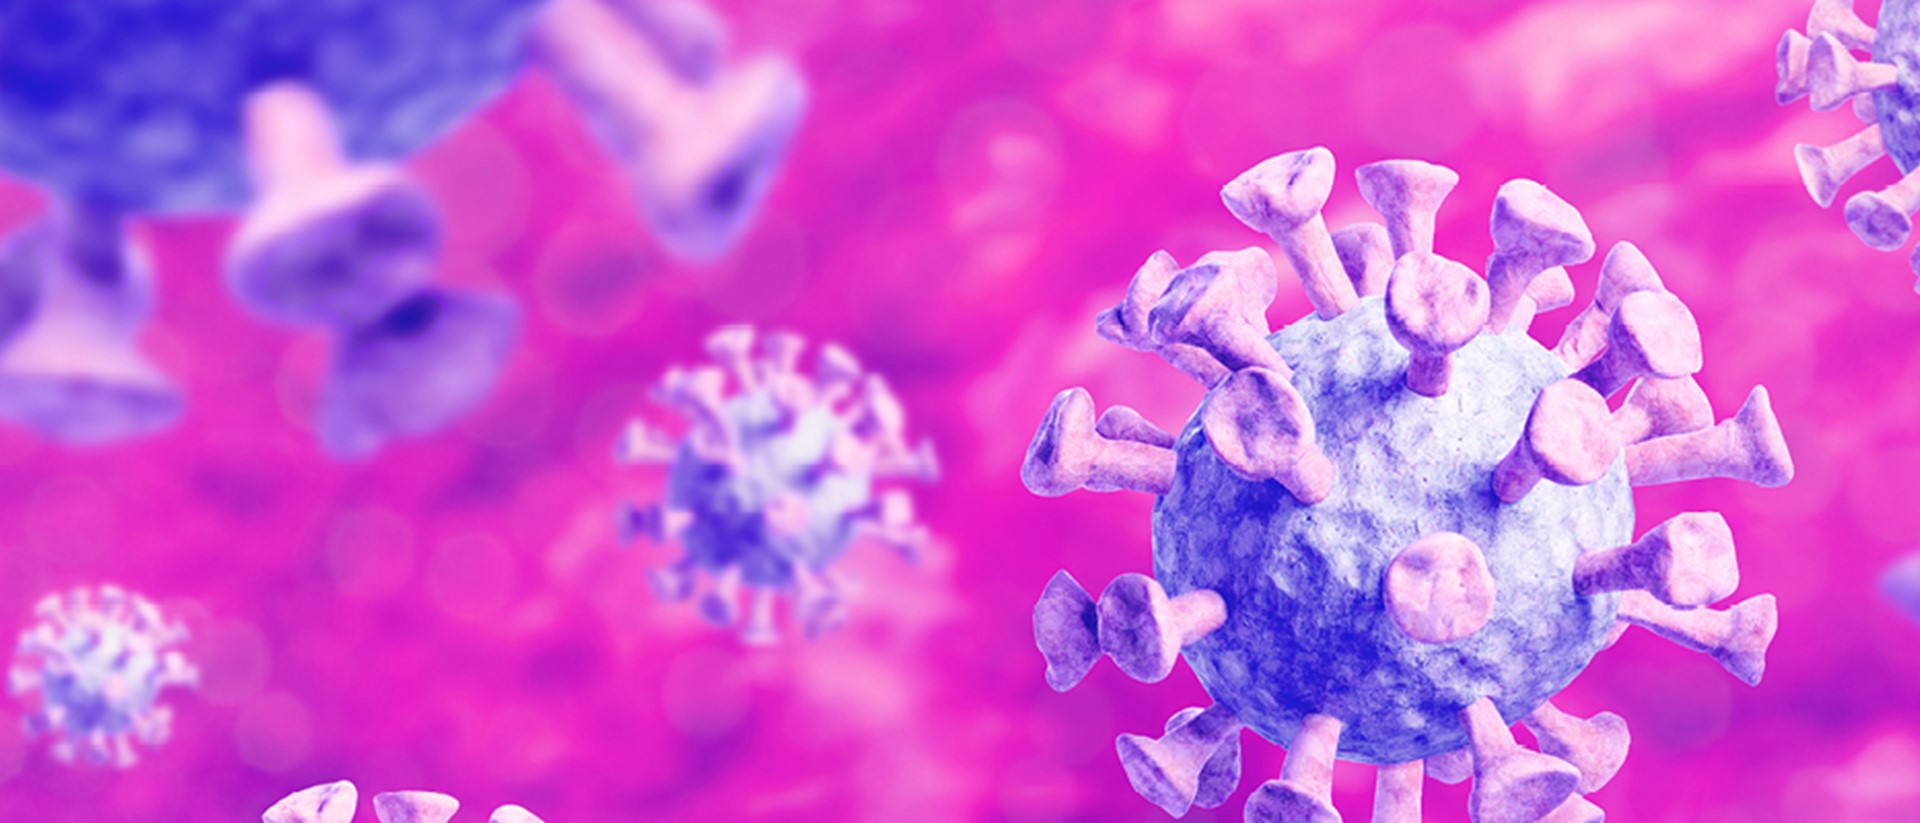 Image of purple viruses on a pink background